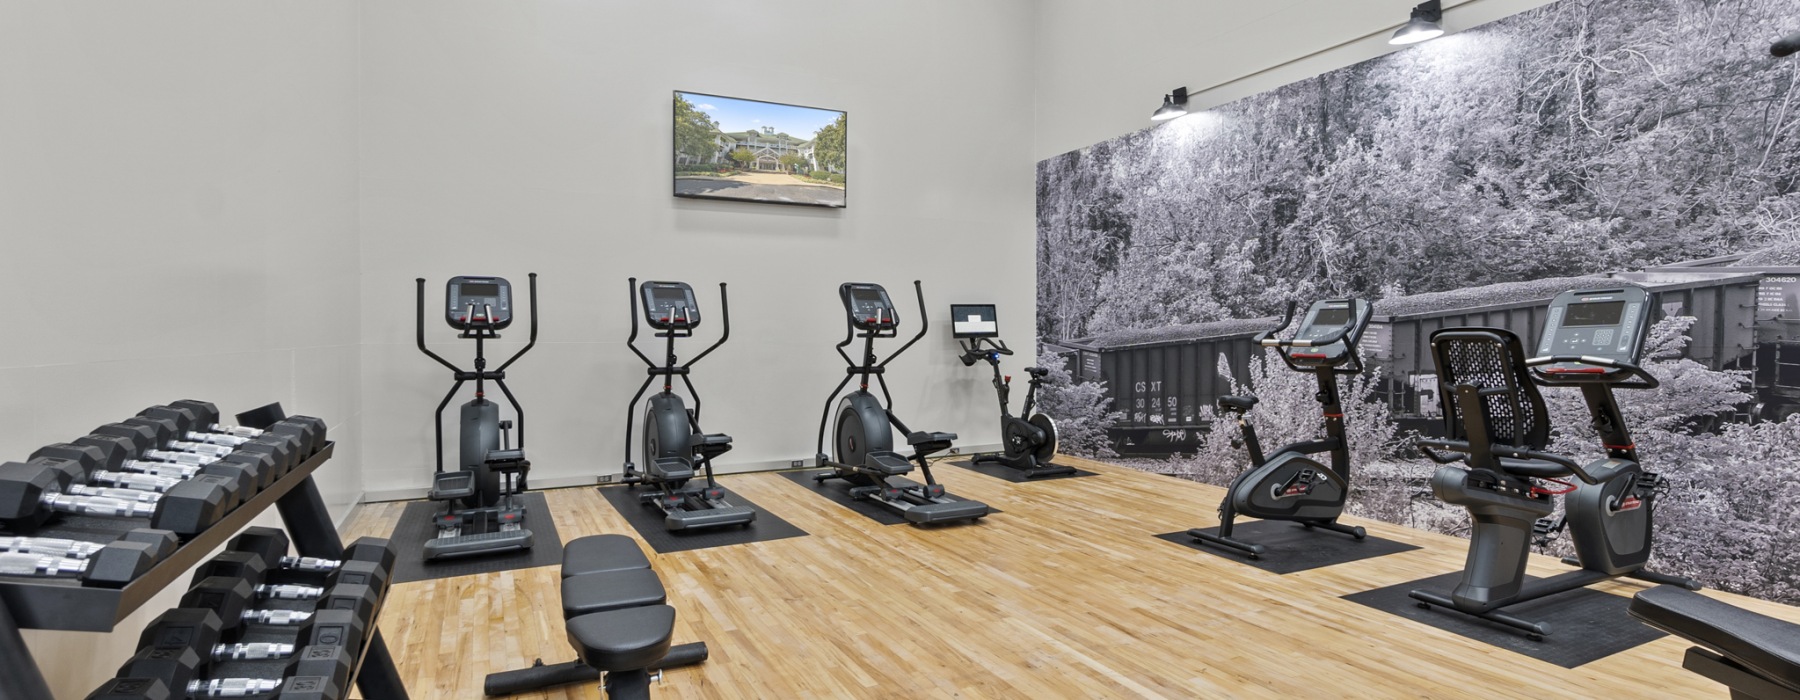 Newly renovated fully equipped fitness center